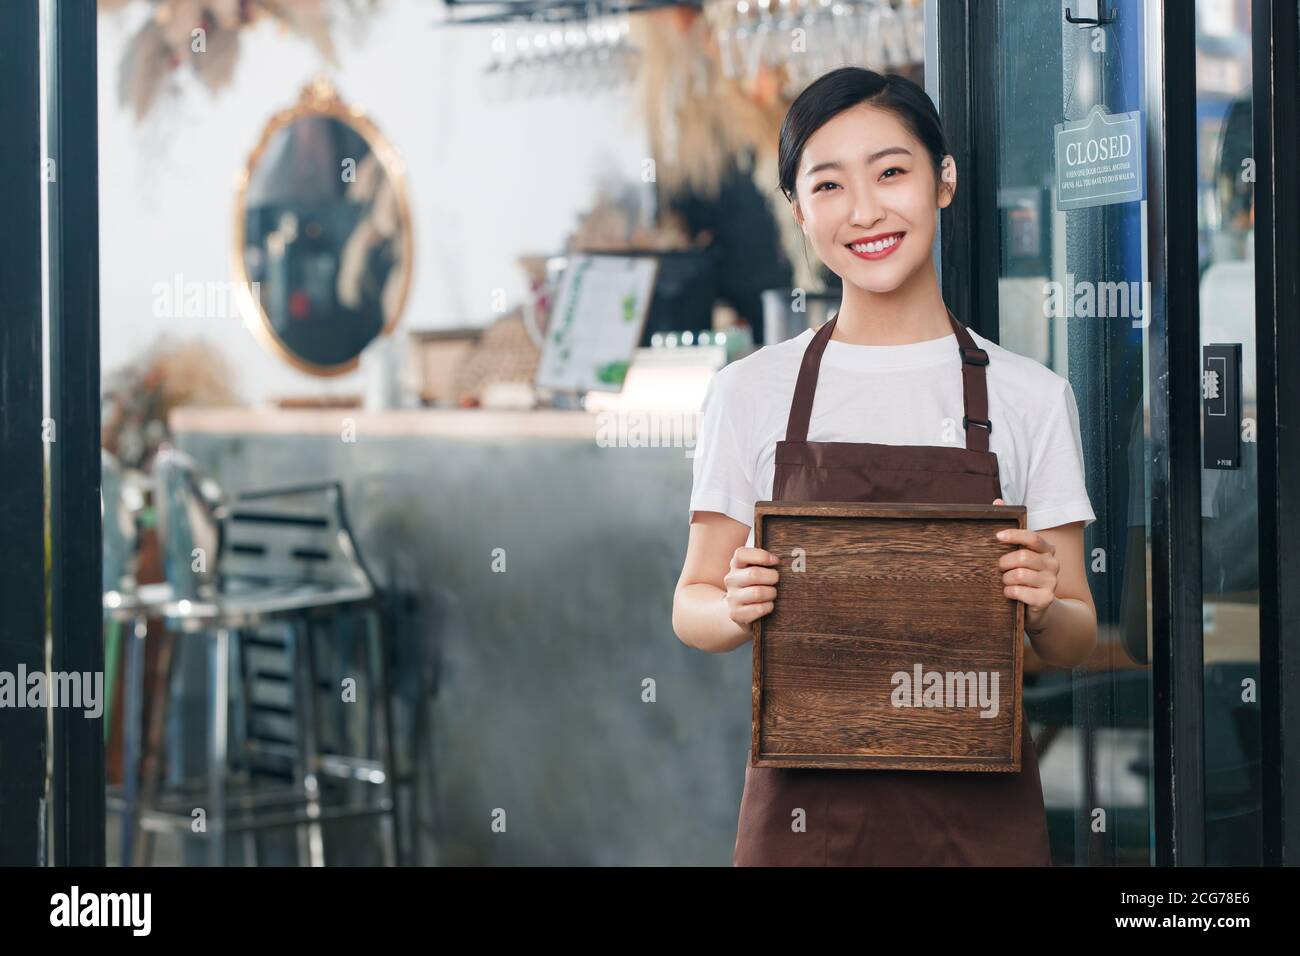 Holding a tray of coffee shop attendant Stock Photo